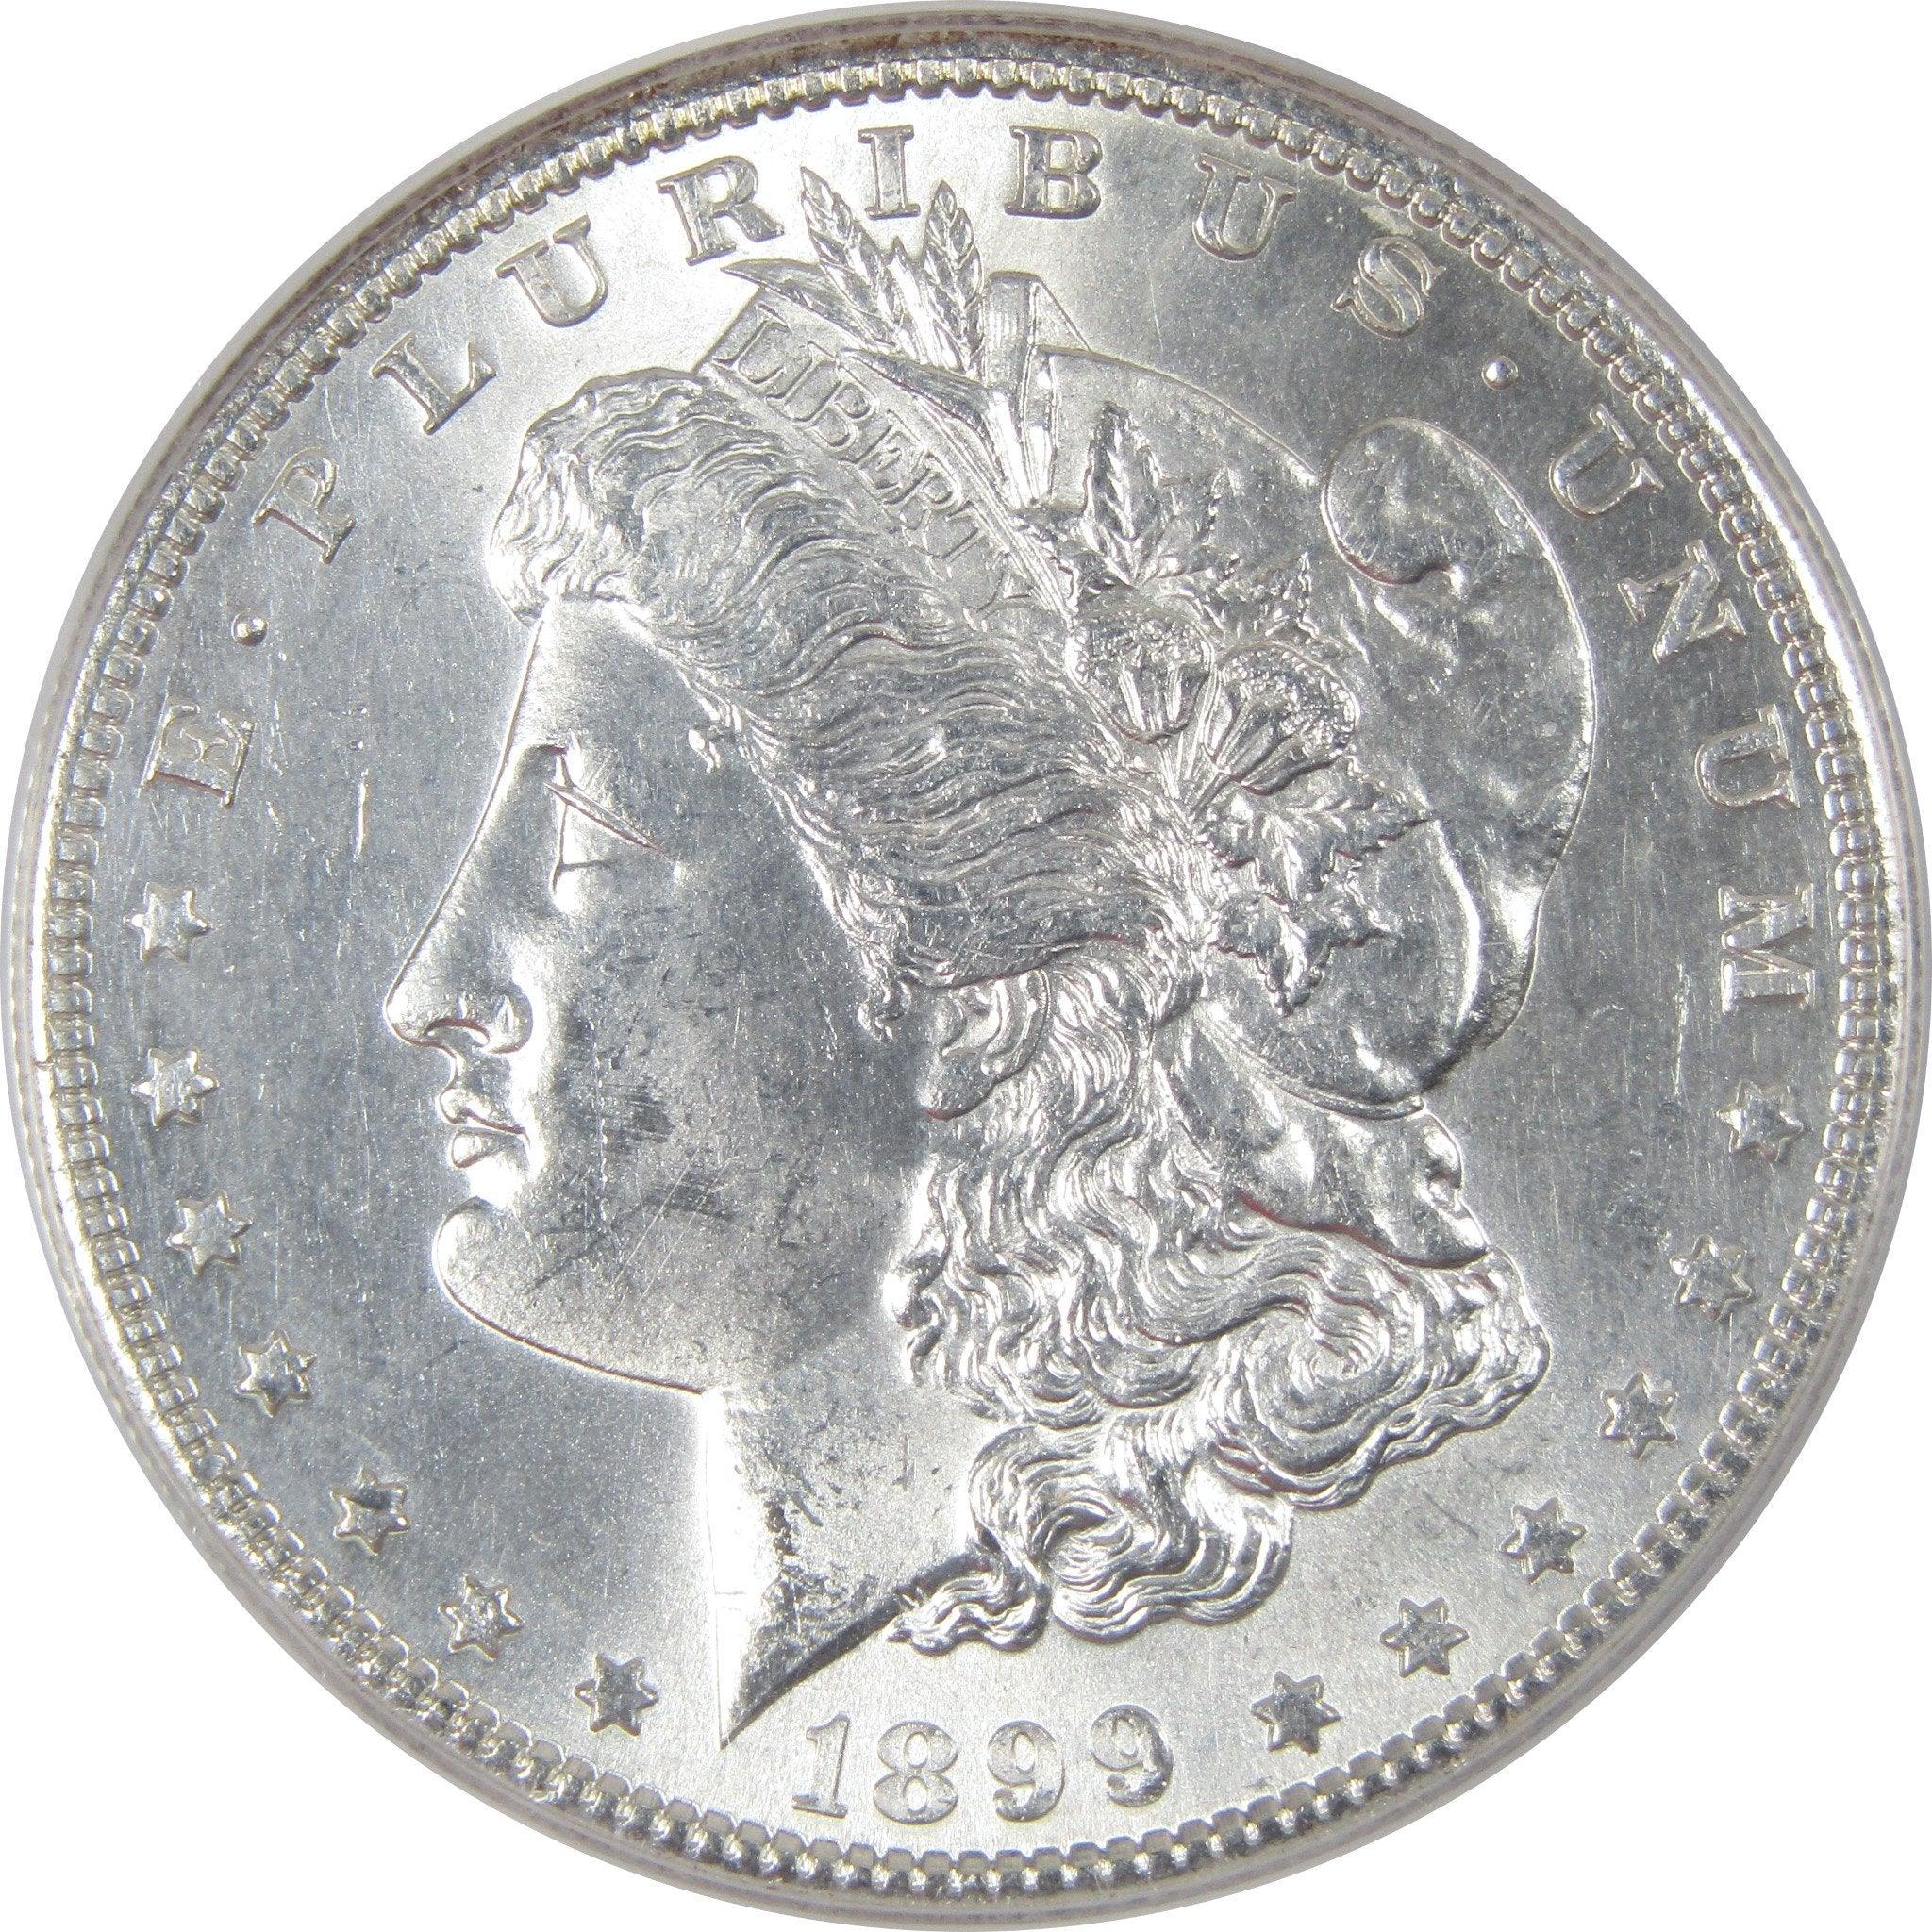 1899 S Morgan Dollar MS 60 Details ANACS Silver SKU:CPC1114 - Morgan coin - Morgan silver dollar - Morgan silver dollar for sale - Profile Coins &amp; Collectibles